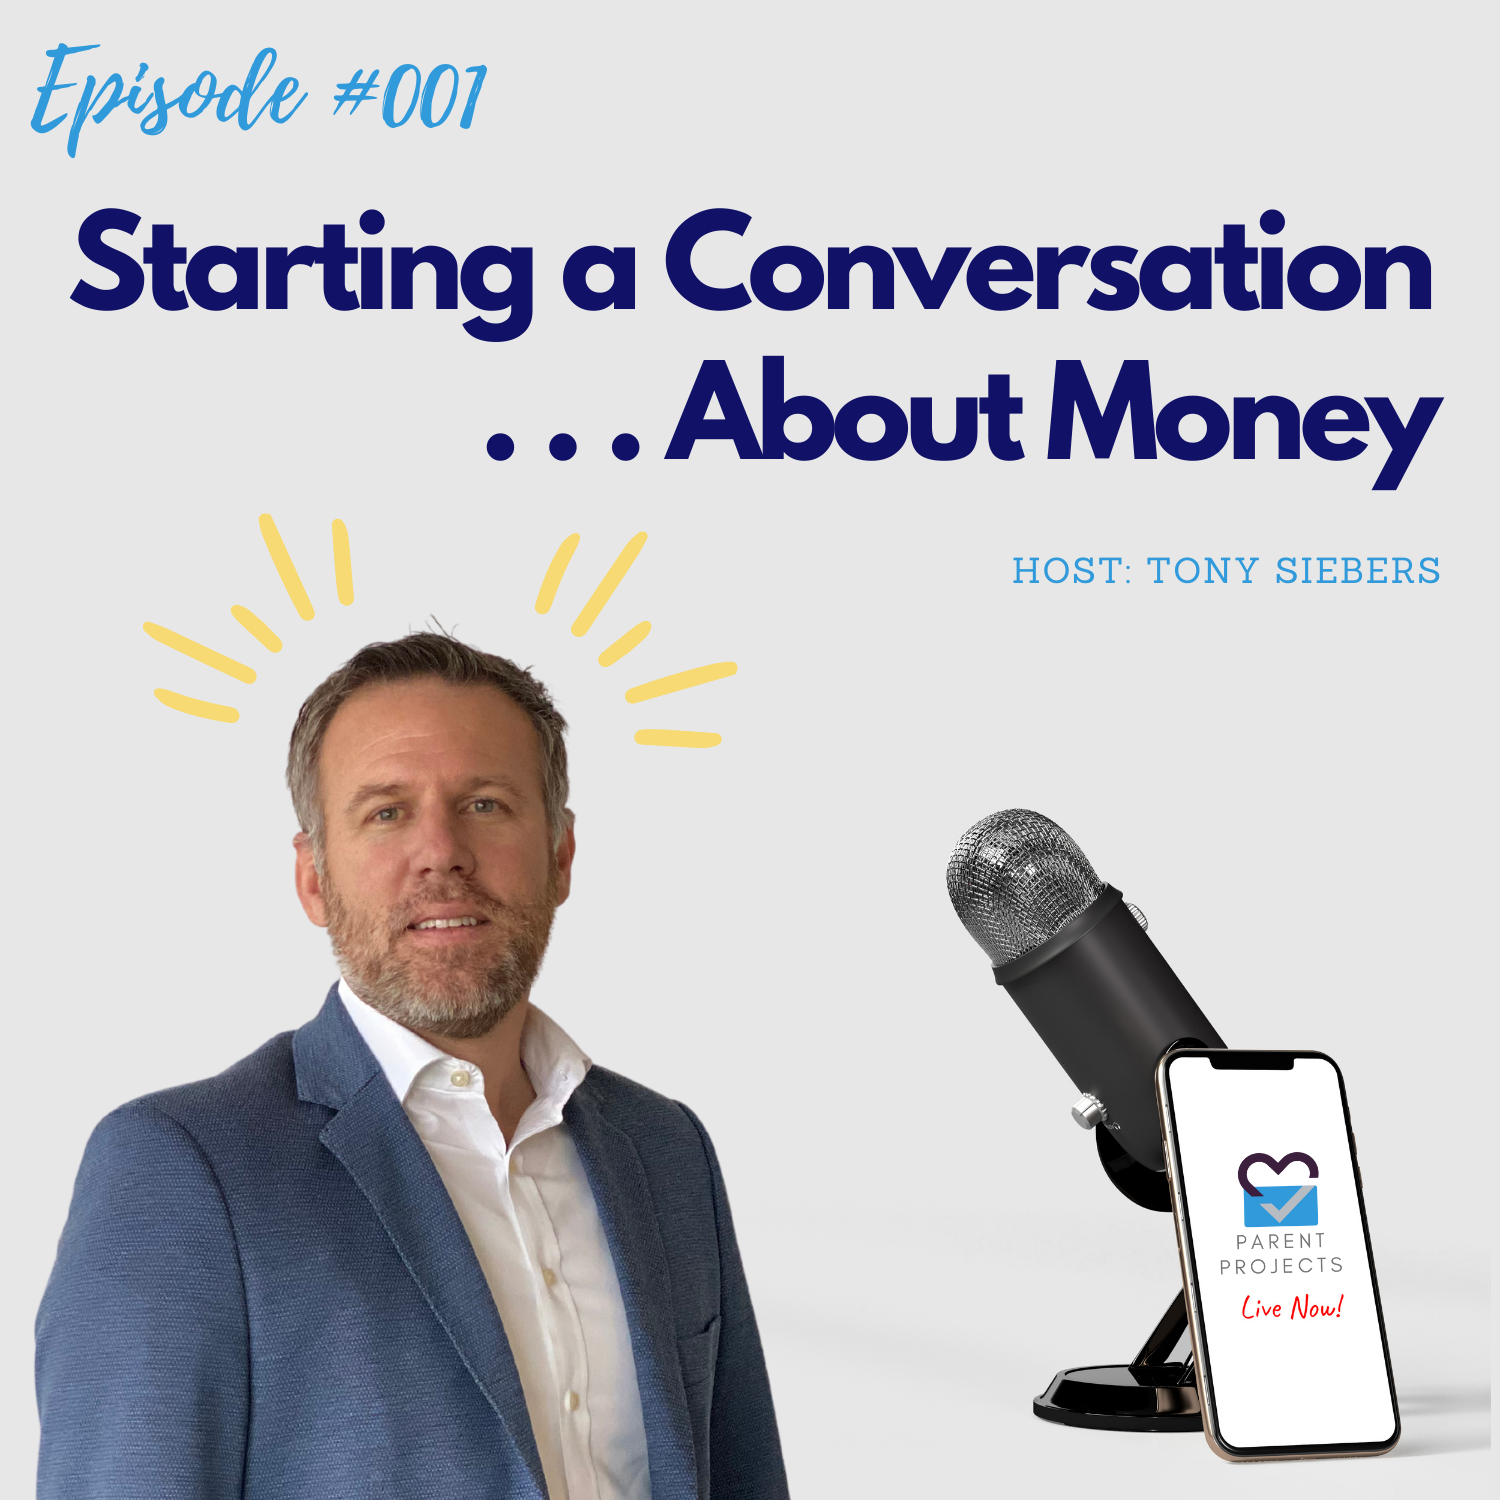 Starting a Conversation About Money (Tony Siebers)